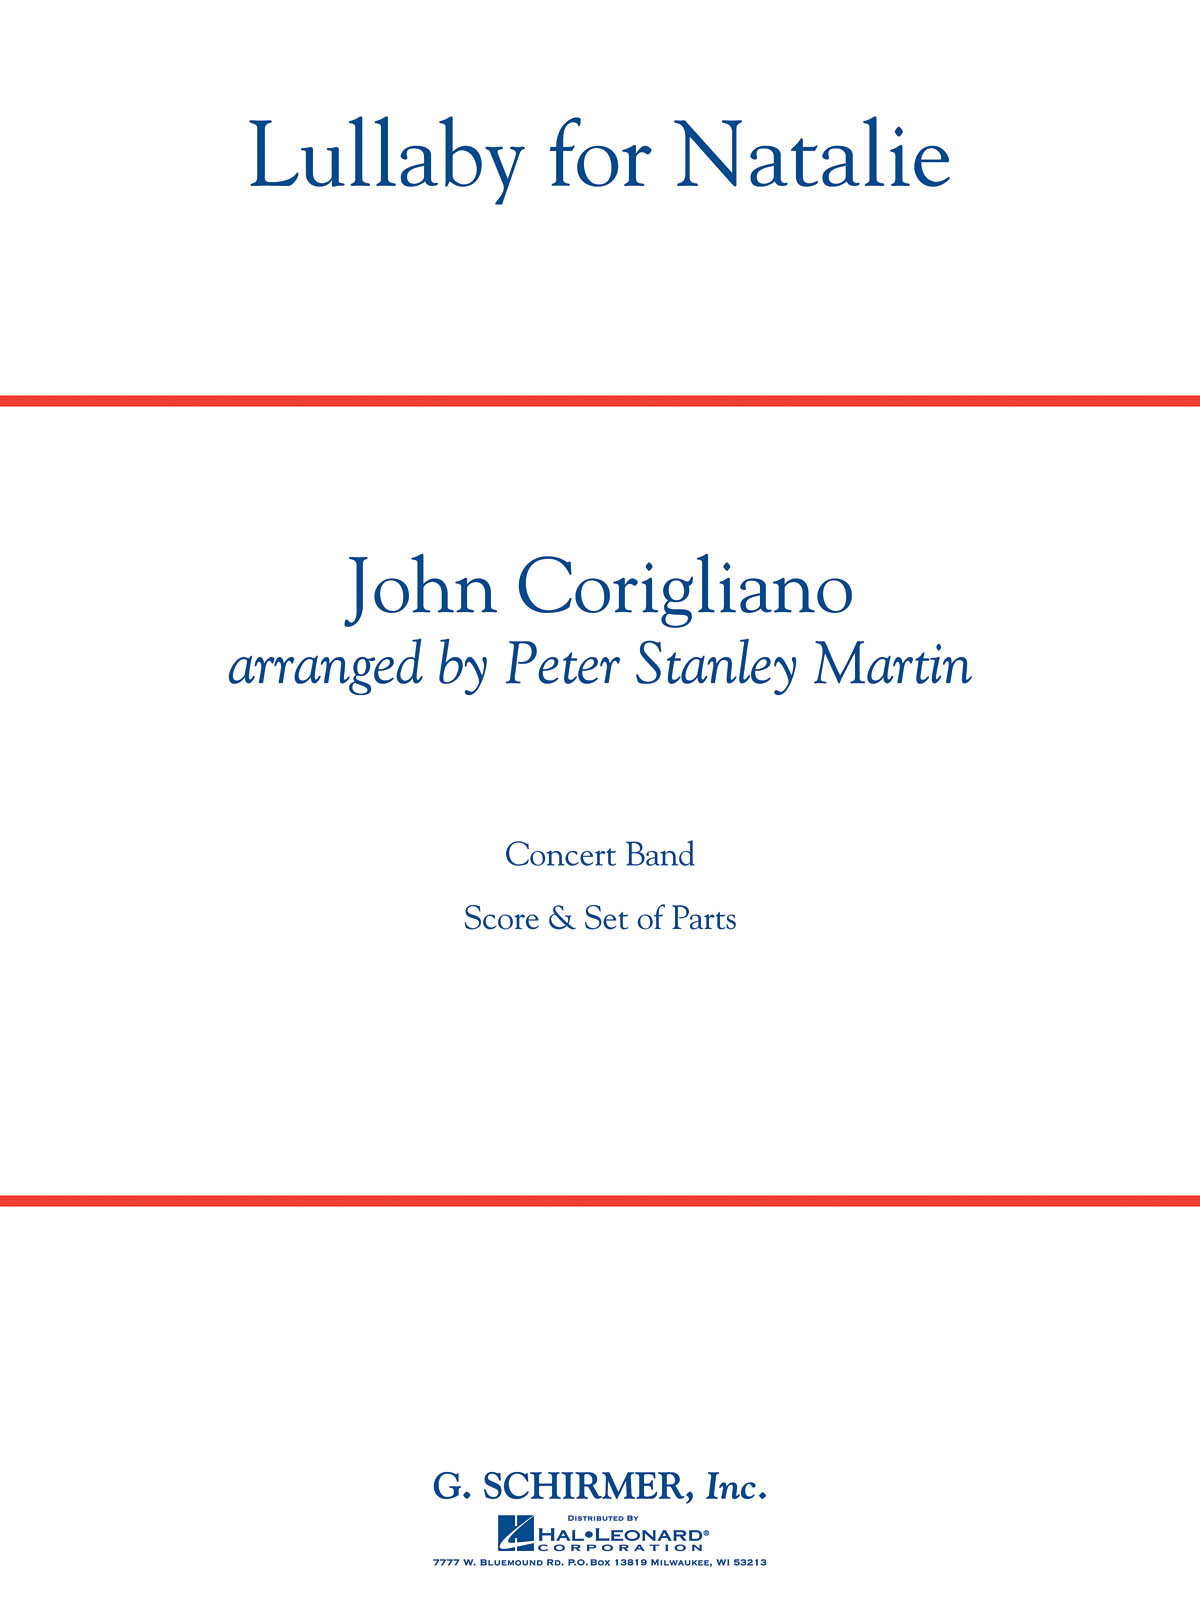 John Corigliano: Lullaby for Natalie: Concert Band: Score and Parts